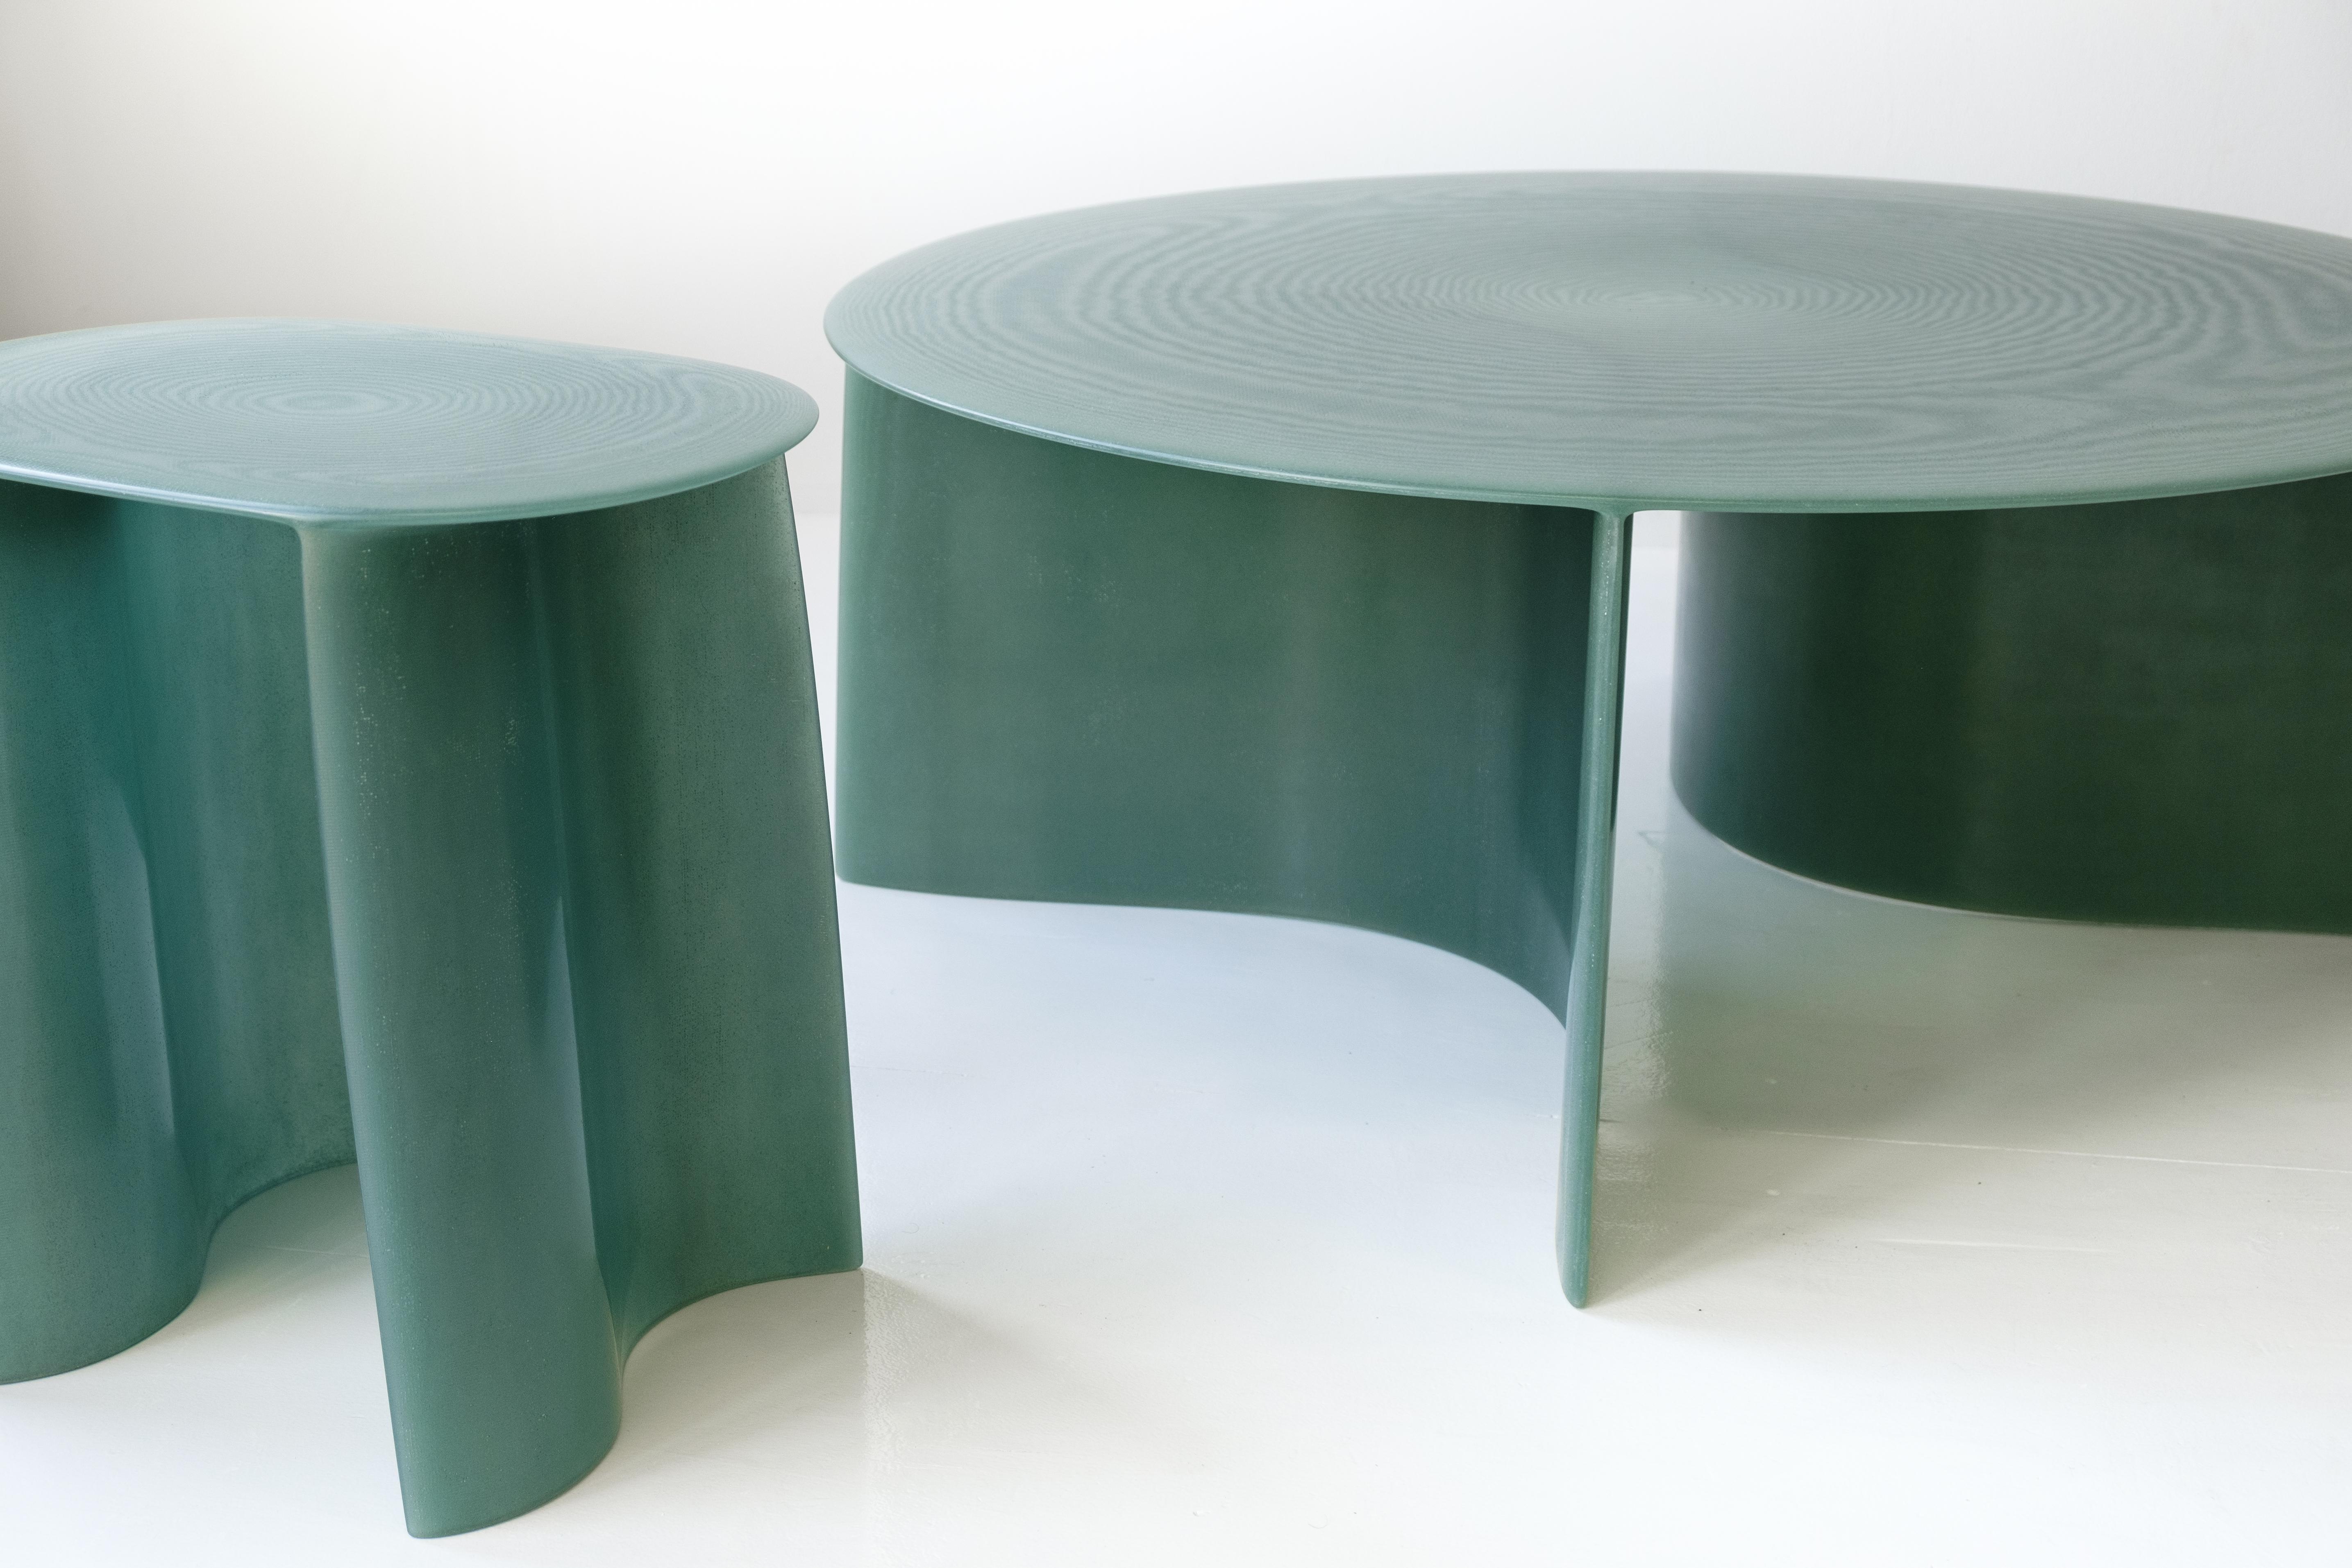 Dutch Contemporary Green Fiberglass, New Wave Coffee Table Round 120cm, by Lukas Cober For Sale